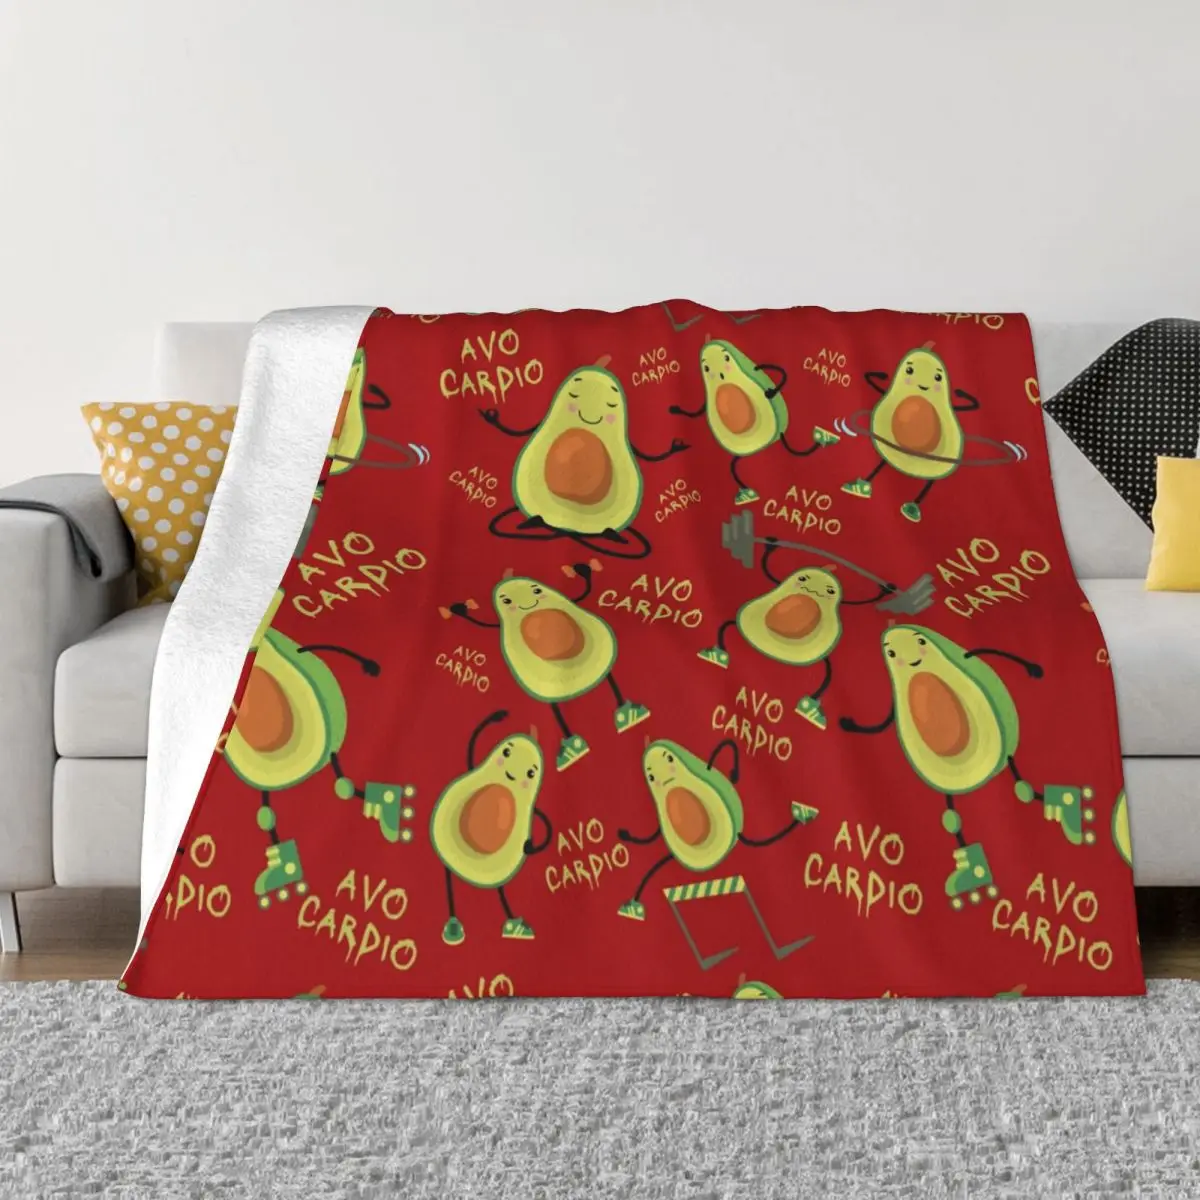 

Avo Cardio Funny Fitness Cobalt Pattern Blankets Warm Flannel Throw Blanket for Bedroom Office Bedspreads Blue Avocado